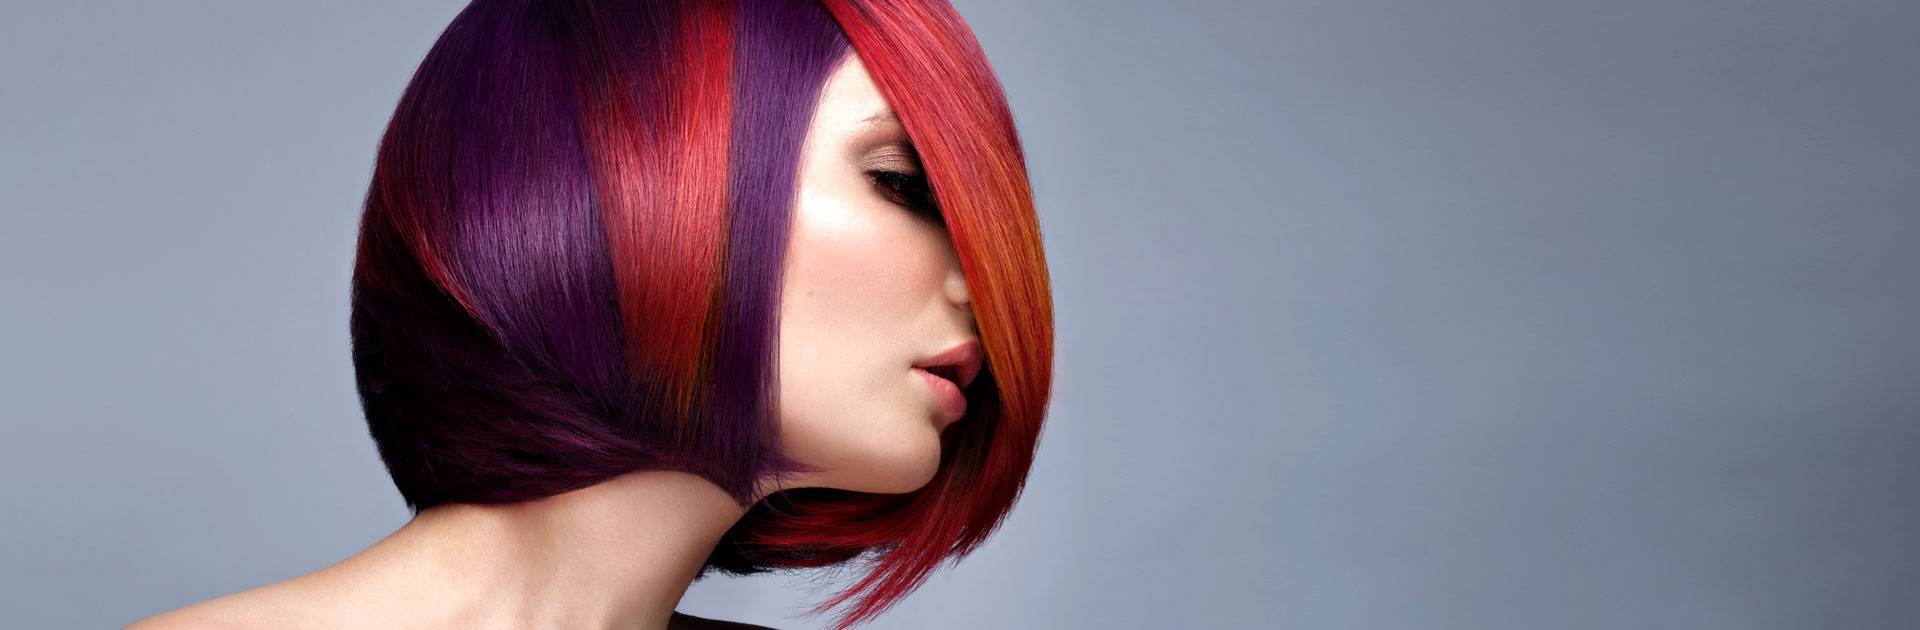 Women - Hair Coloring and Streaks - green trends - Global Hair Color &  Highlights From Experts